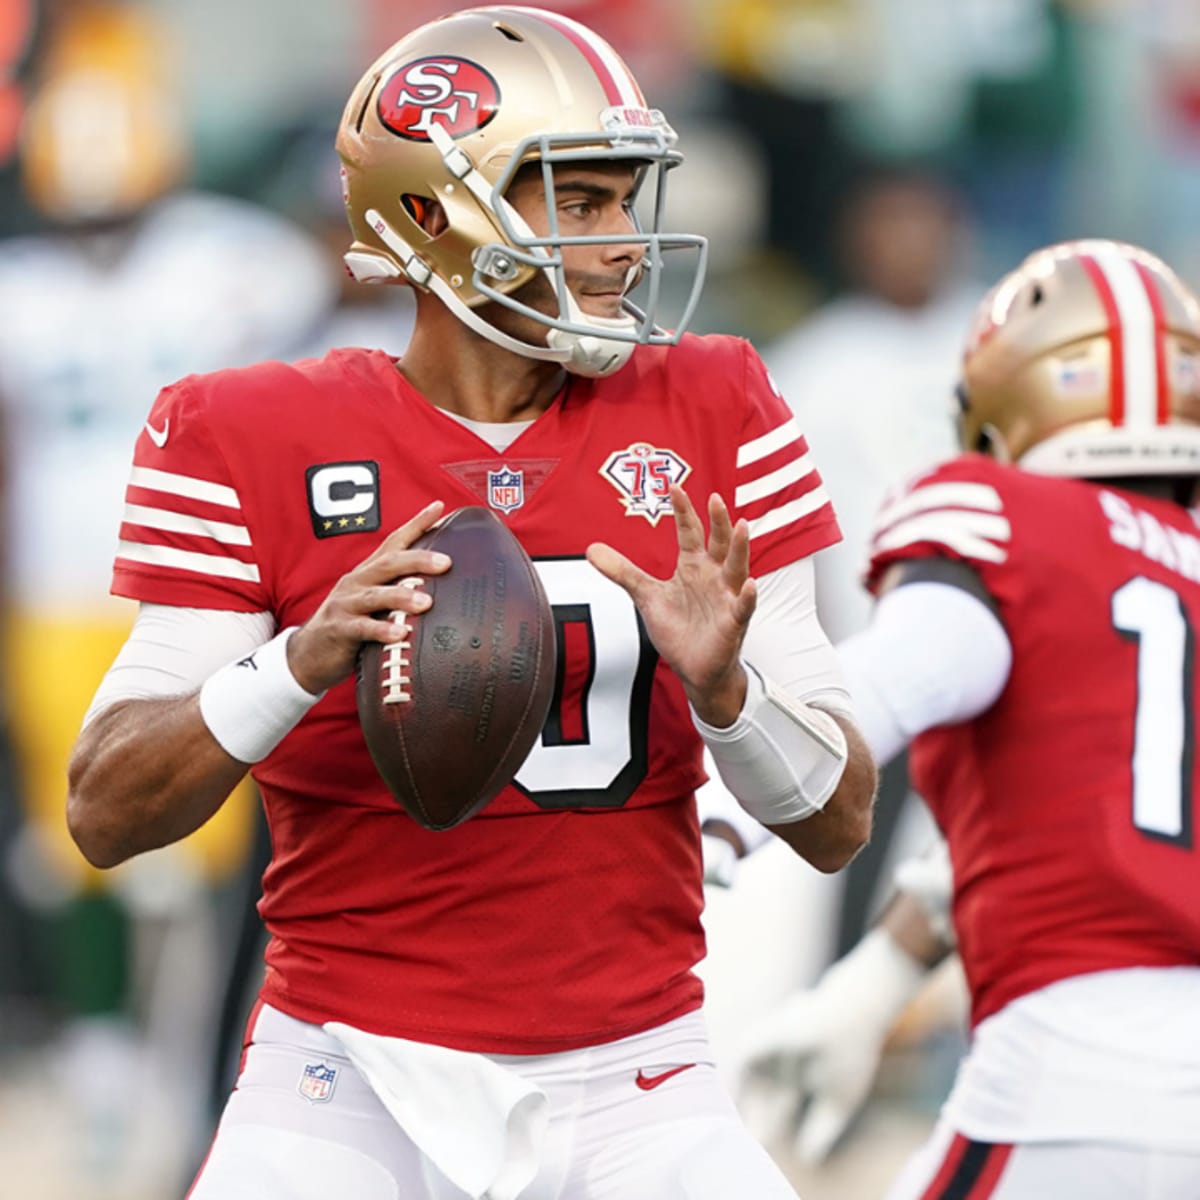 Live Blog: Packers-49ers